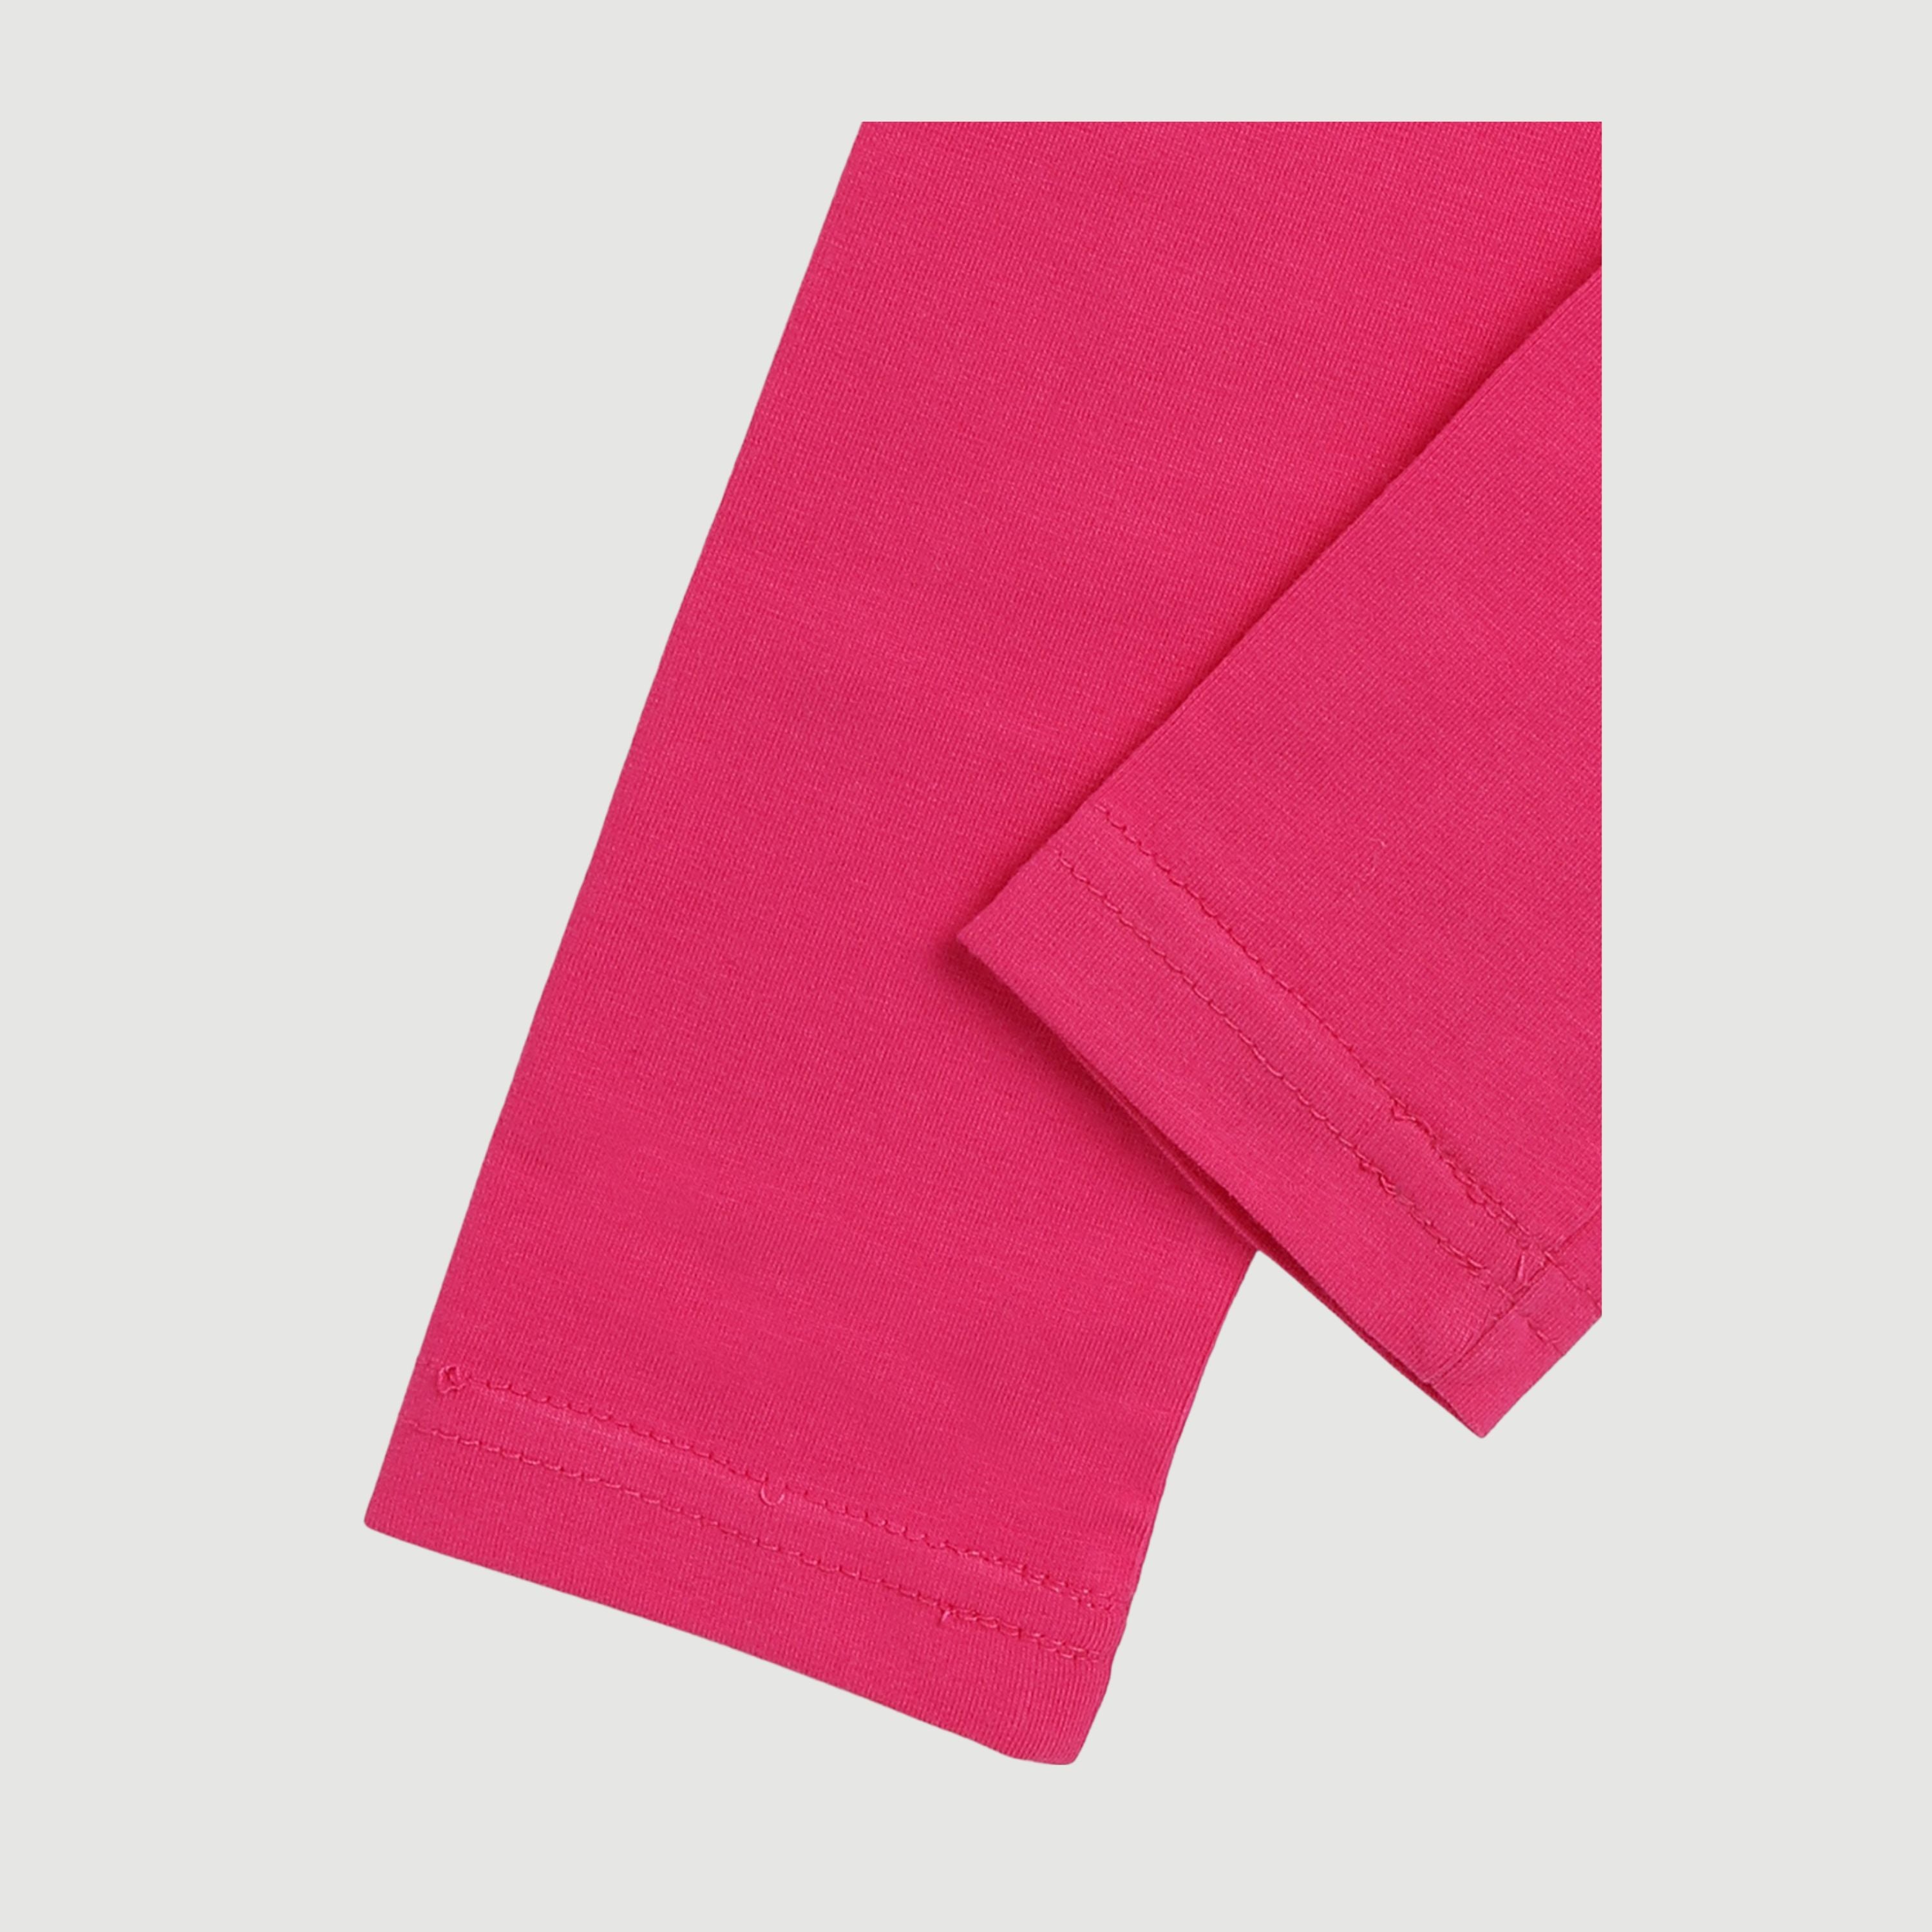 Stretchable Leggings For Girl's - HOT PINK